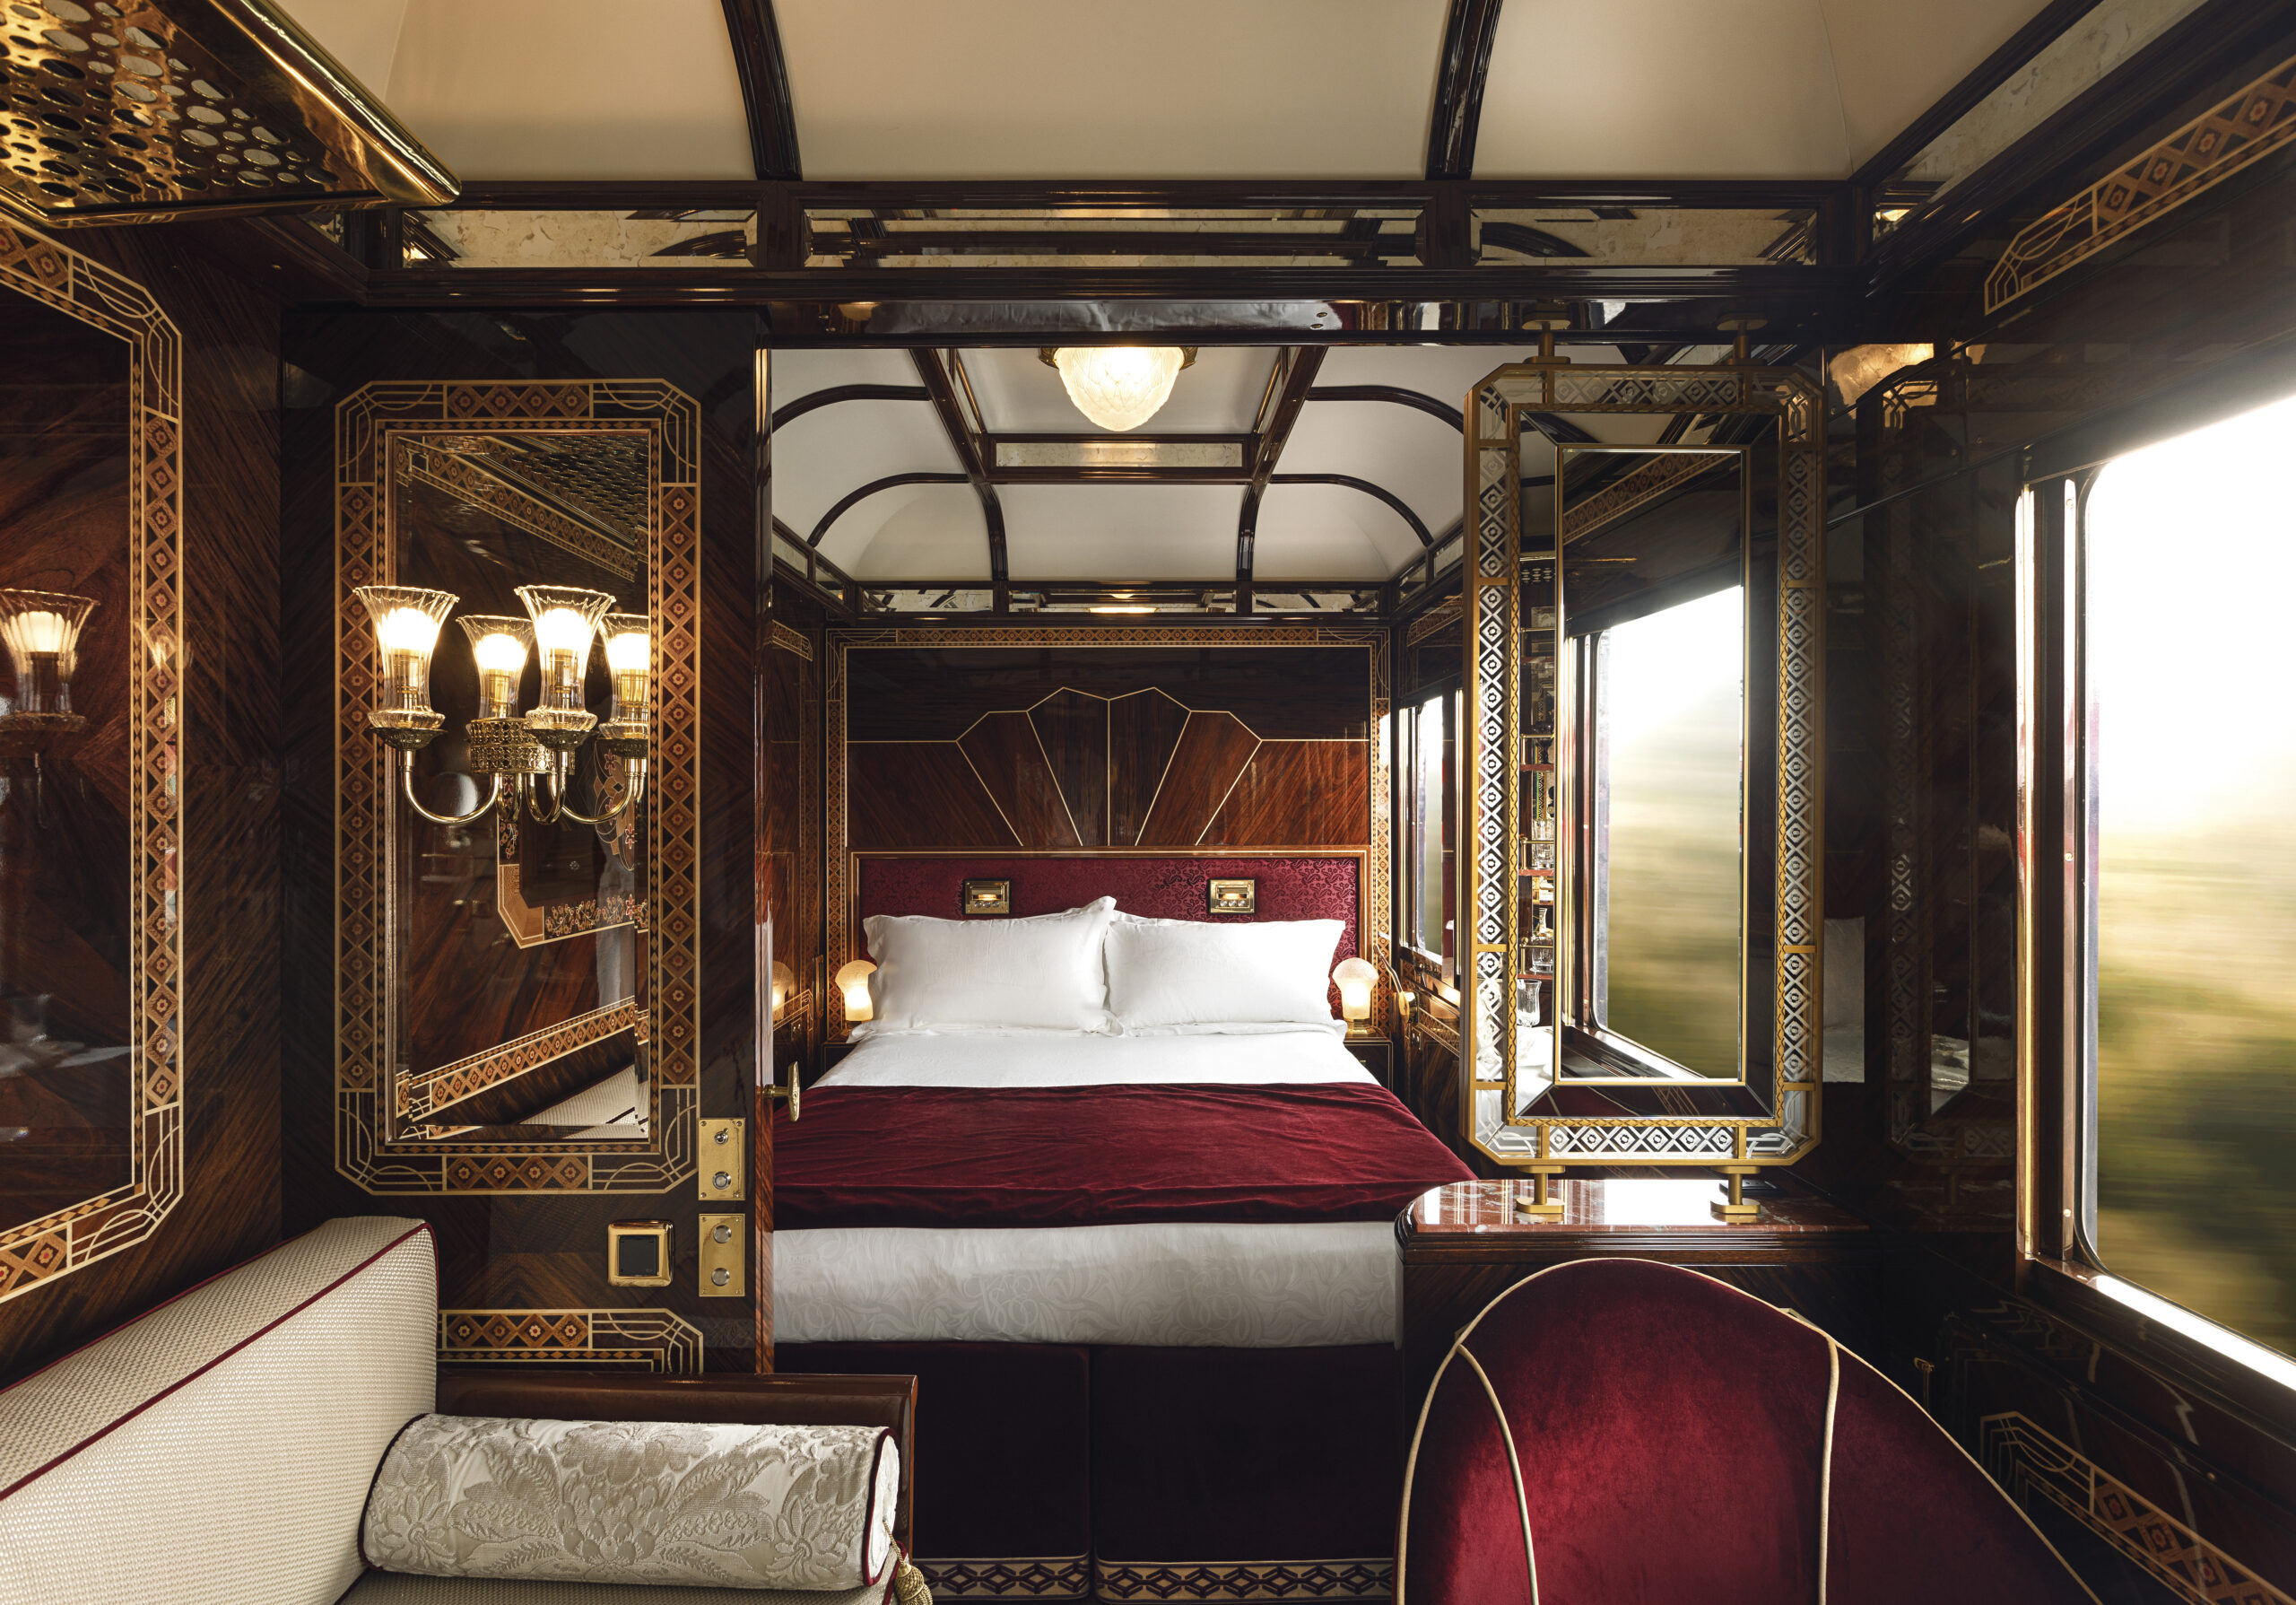 grand suite at the venice simplon orient express with inlaid wood paneling, red velvet upholstery and classic elegant glass lalique wall lights